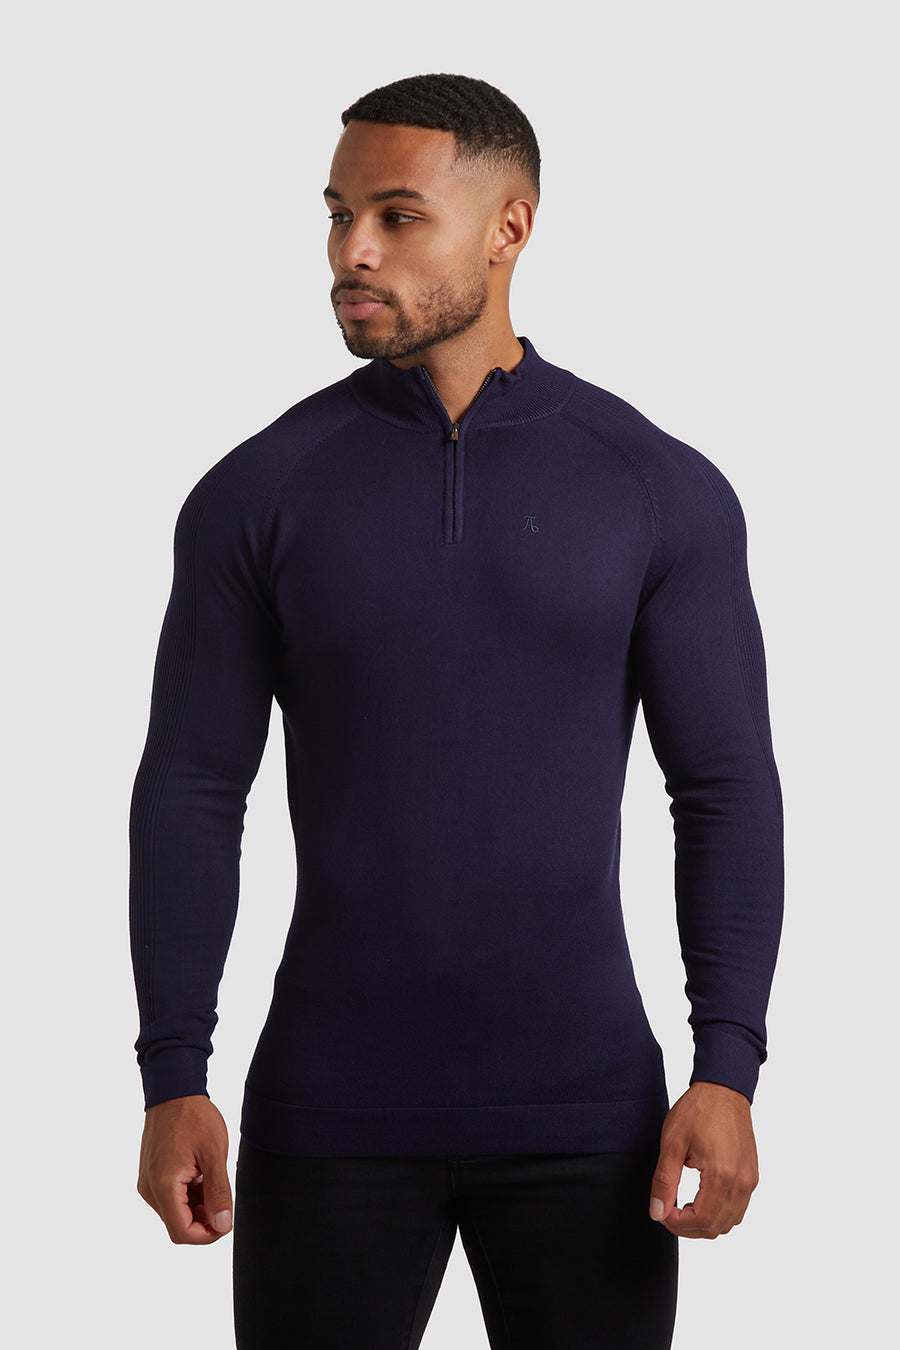 Placement Rib Half Zip Neck Long Sleeve in Navy - TAILORED ATHLETE - USA